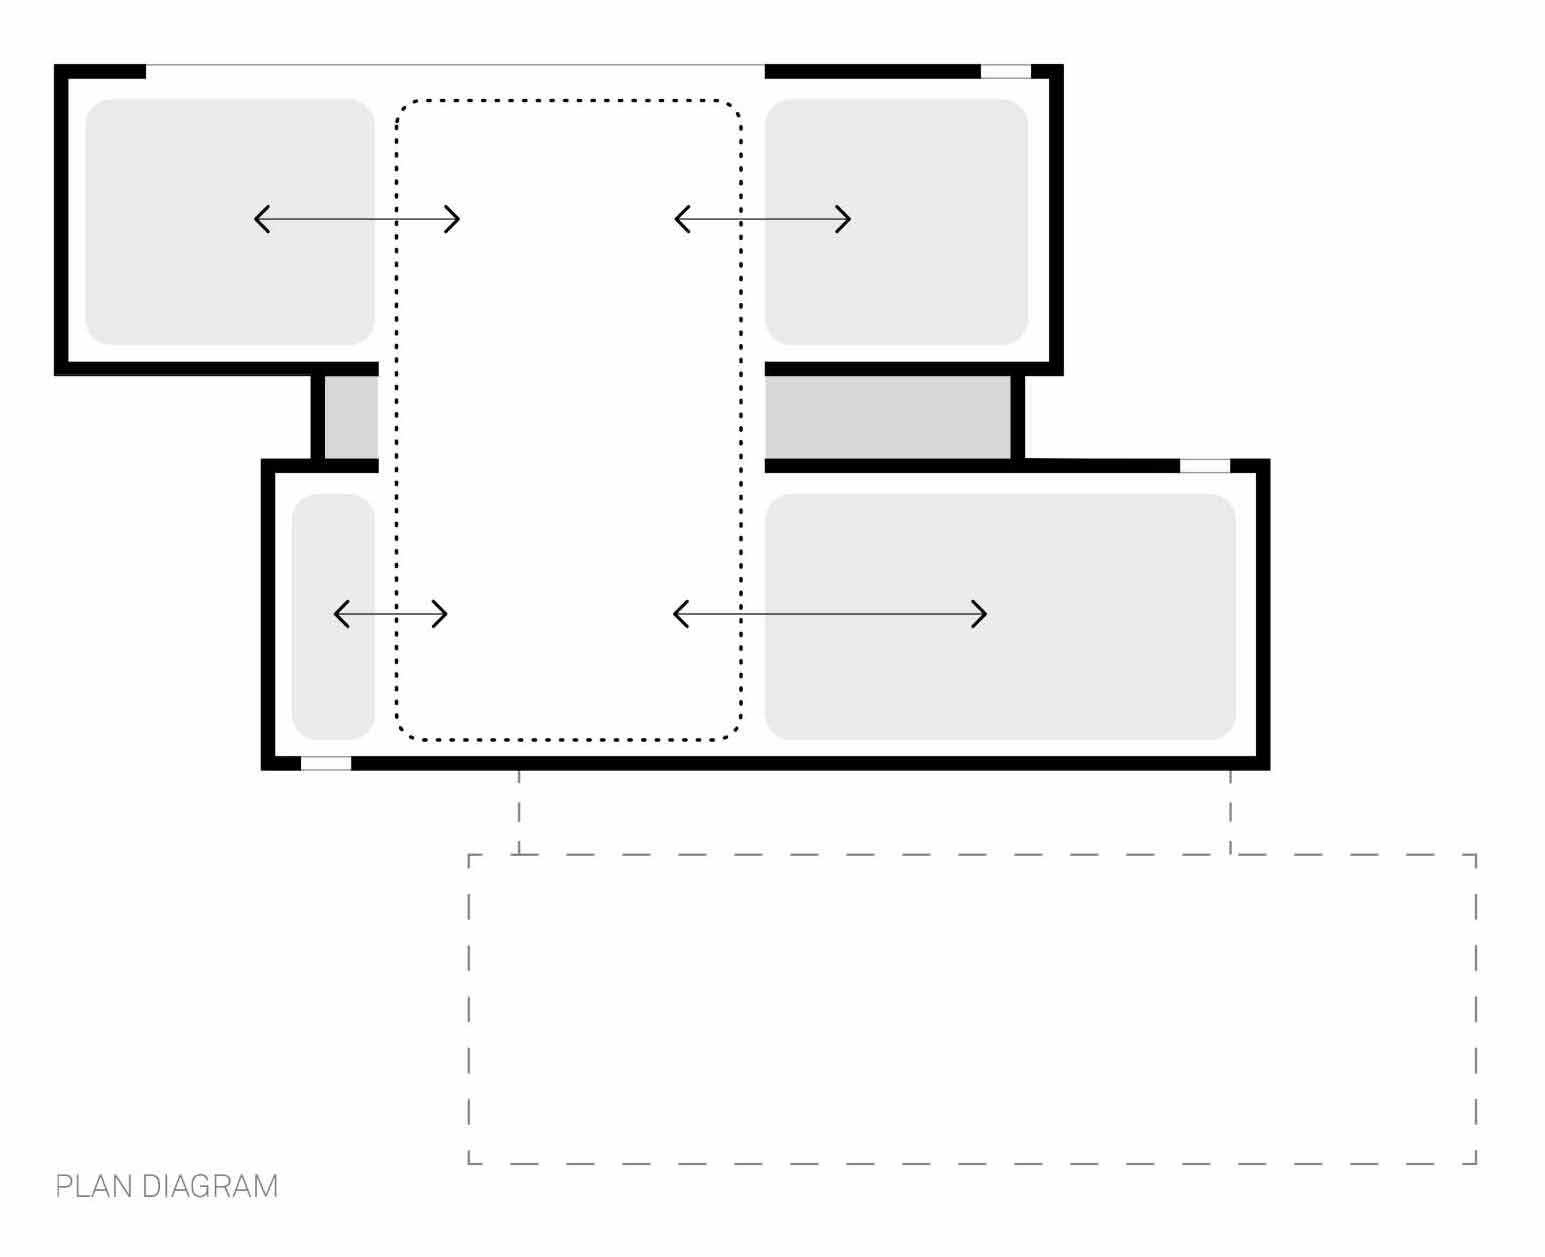 Architectural drawings for a small 1-bedroom home.